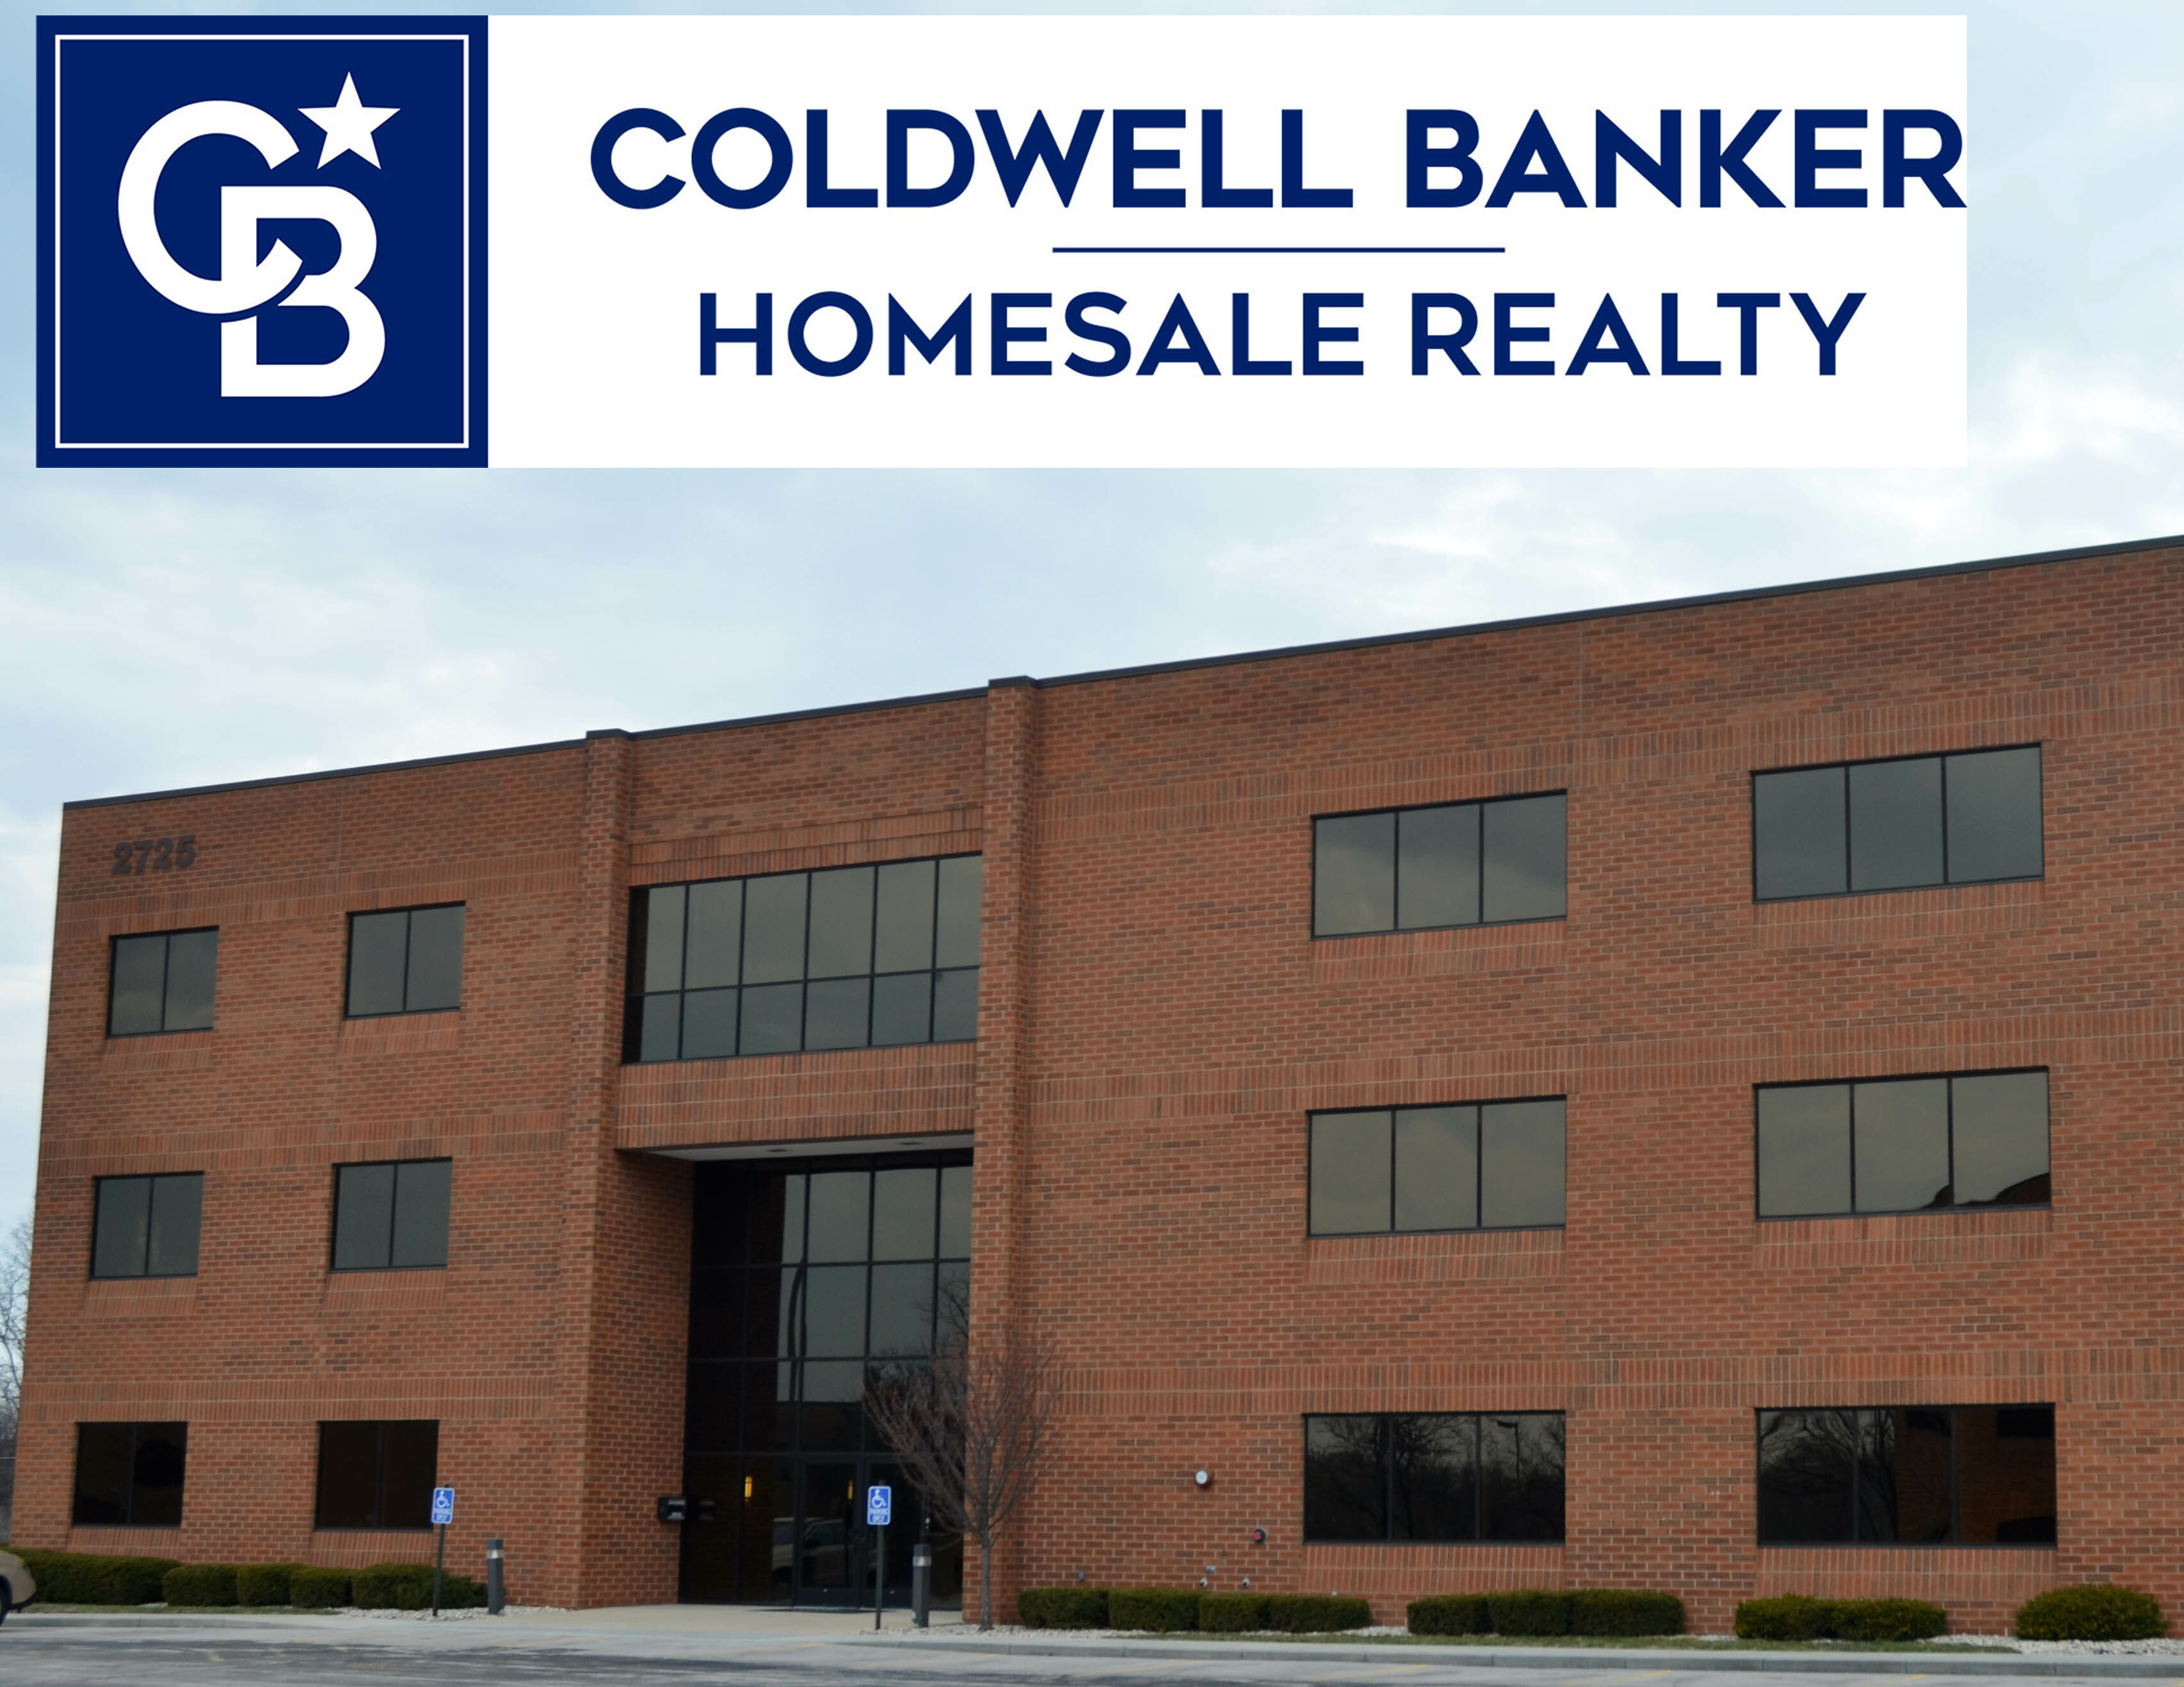 Homesale Realty,New Berlin,Homesale Realty